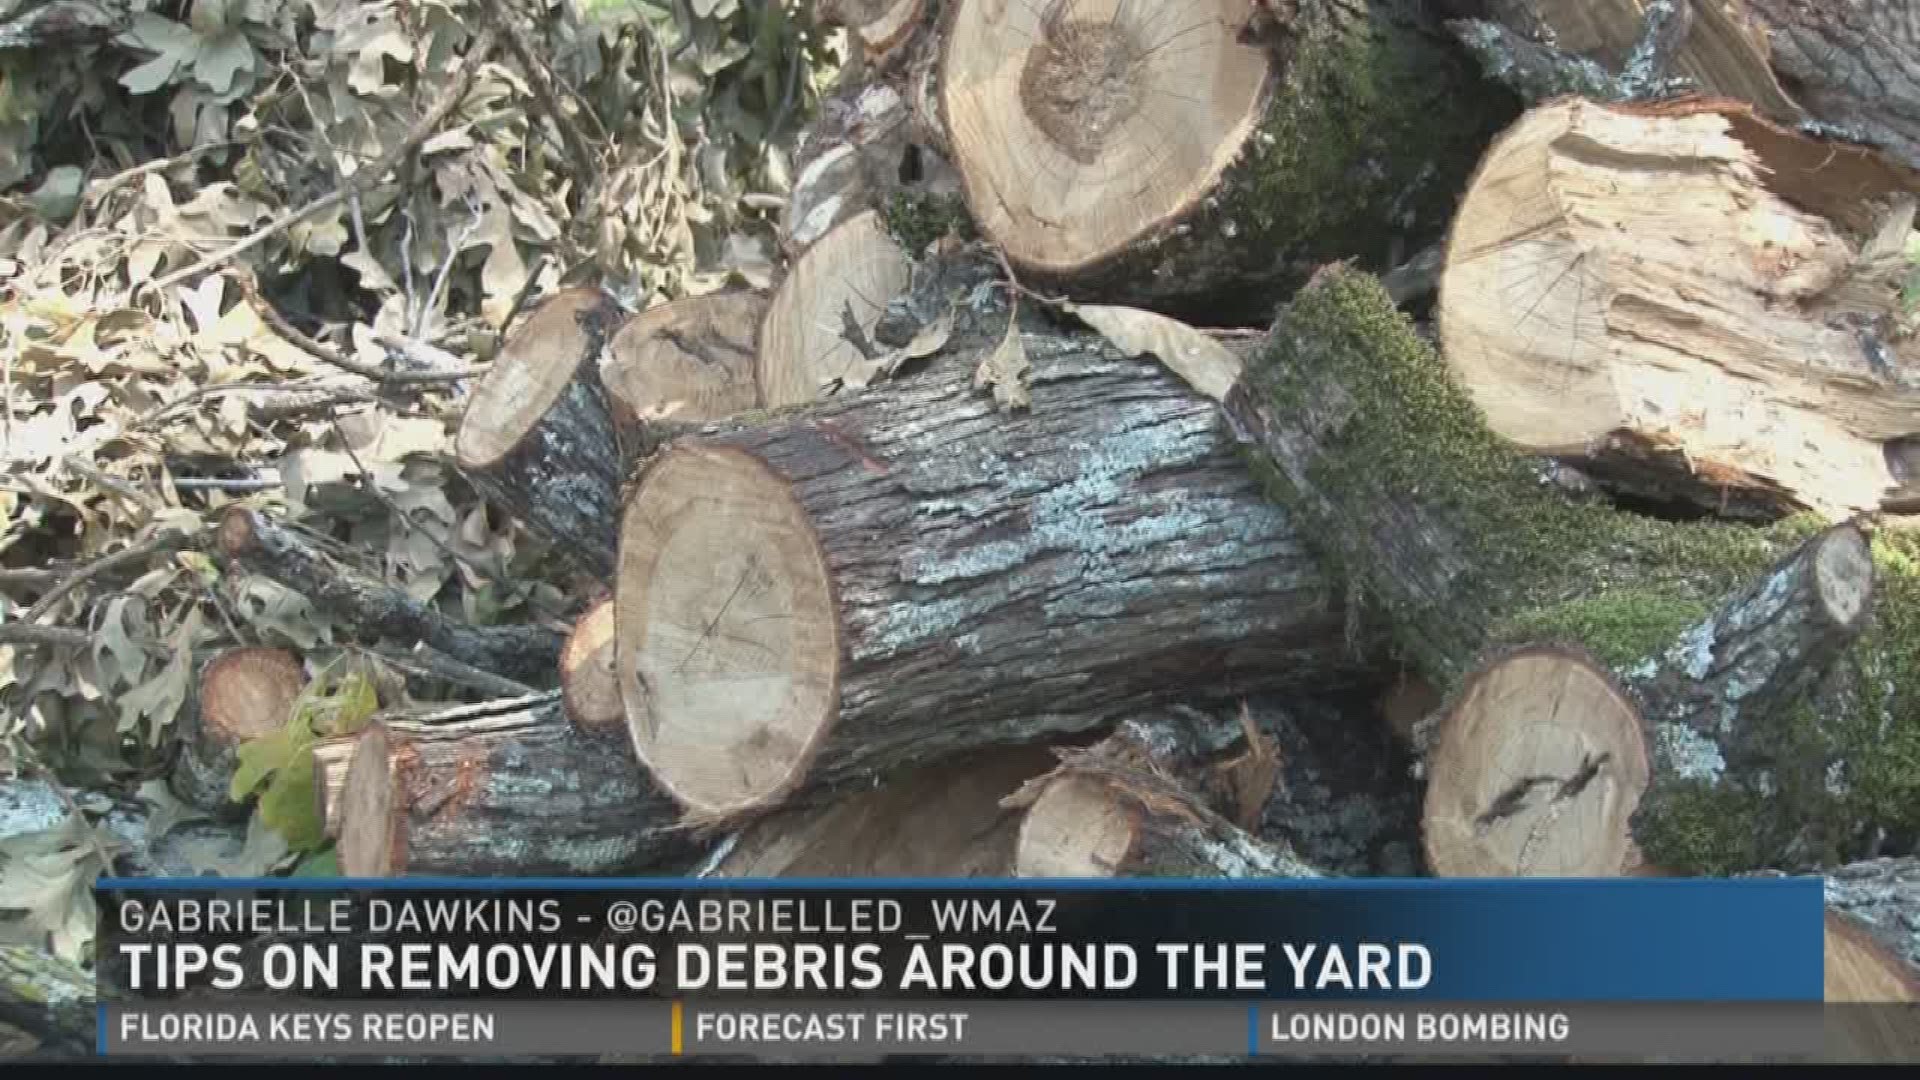 Tips on removing debris from yard